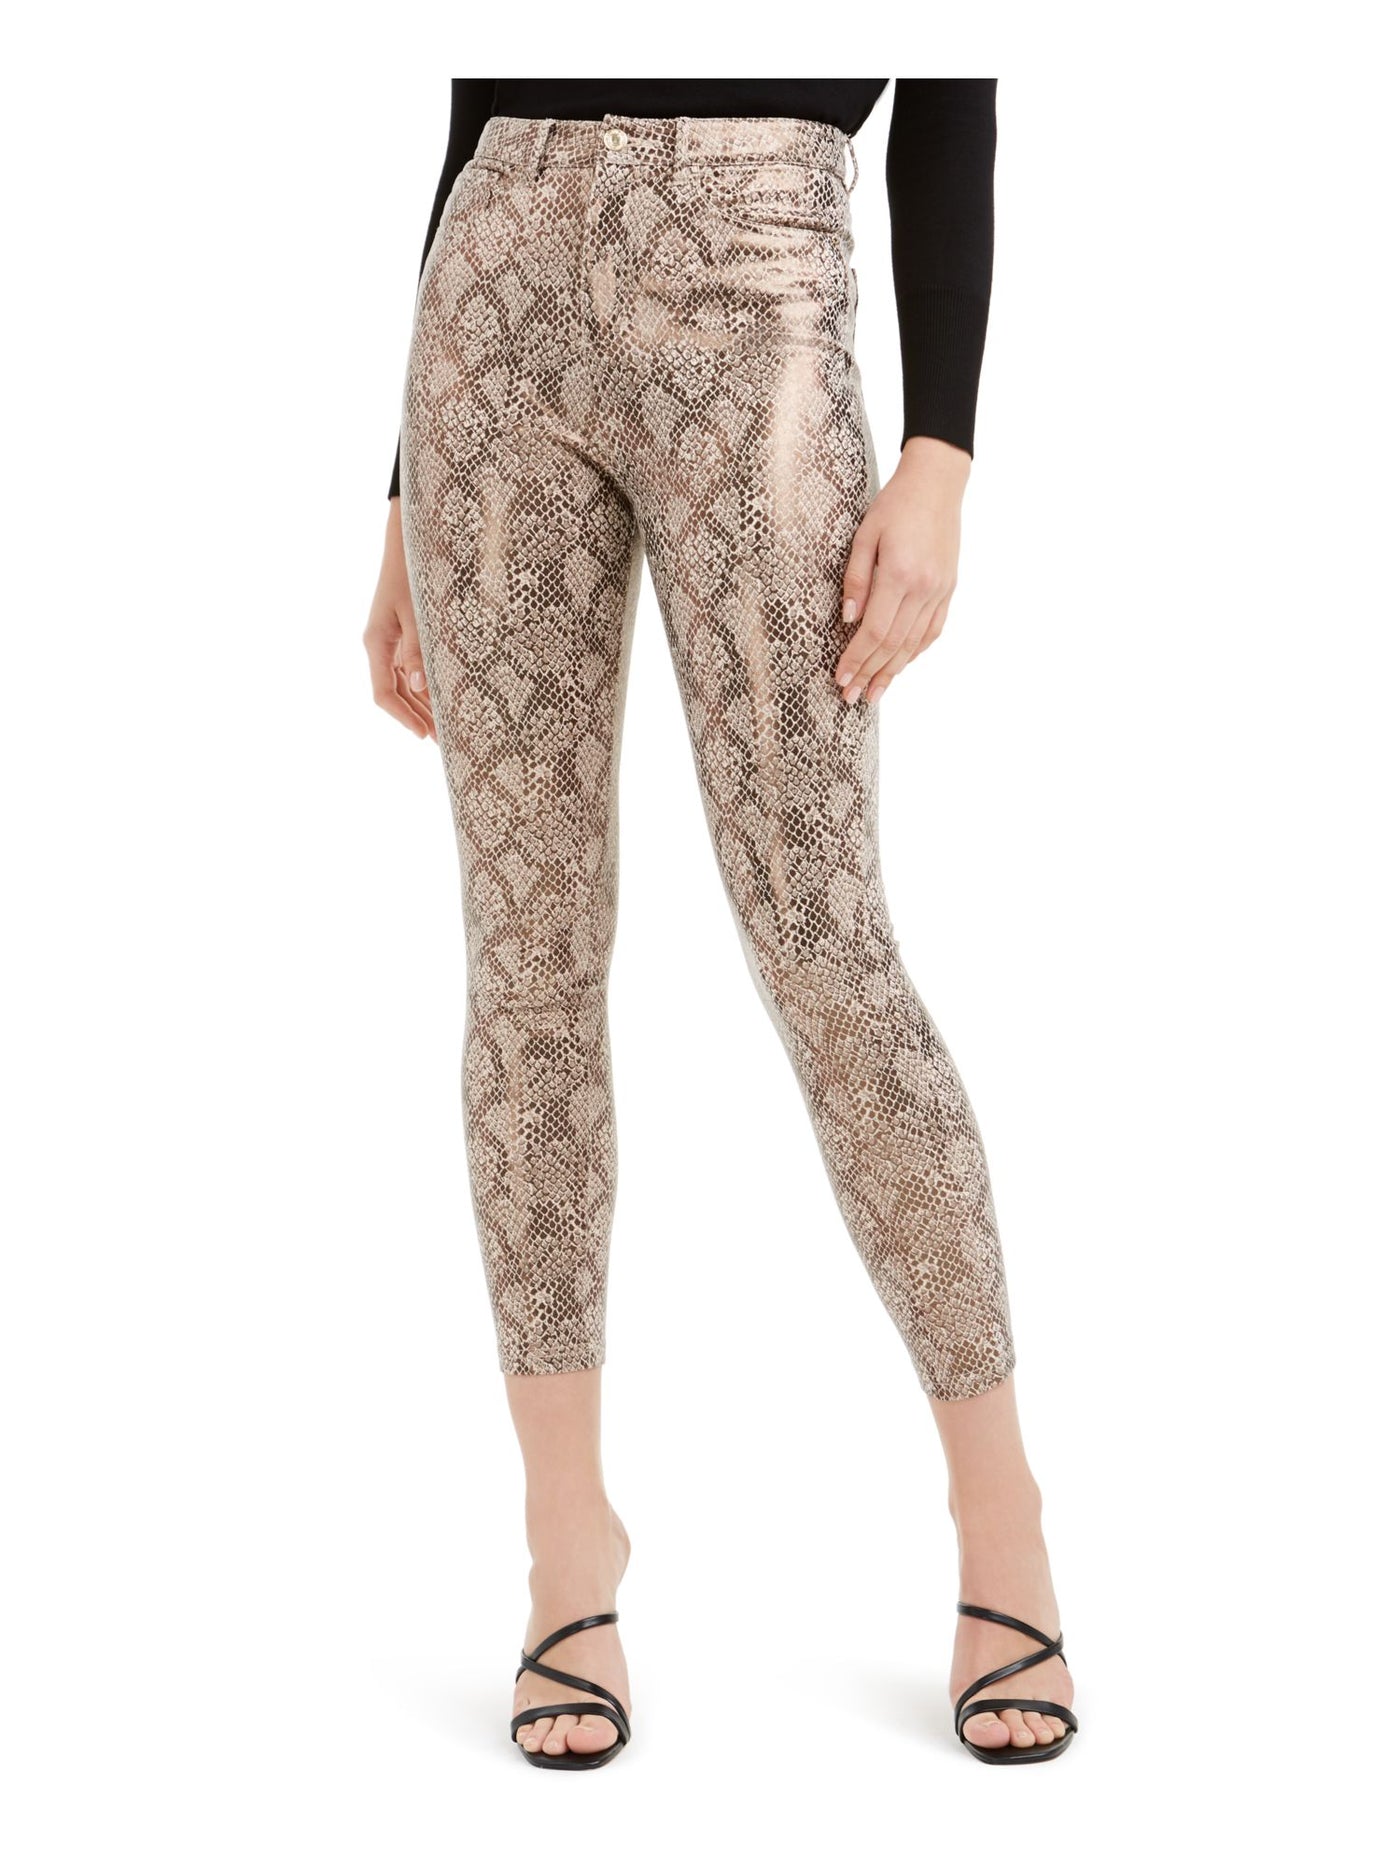 GUESS Womens Beige Zippered Pocketed Snake Print Skinny Pants 0